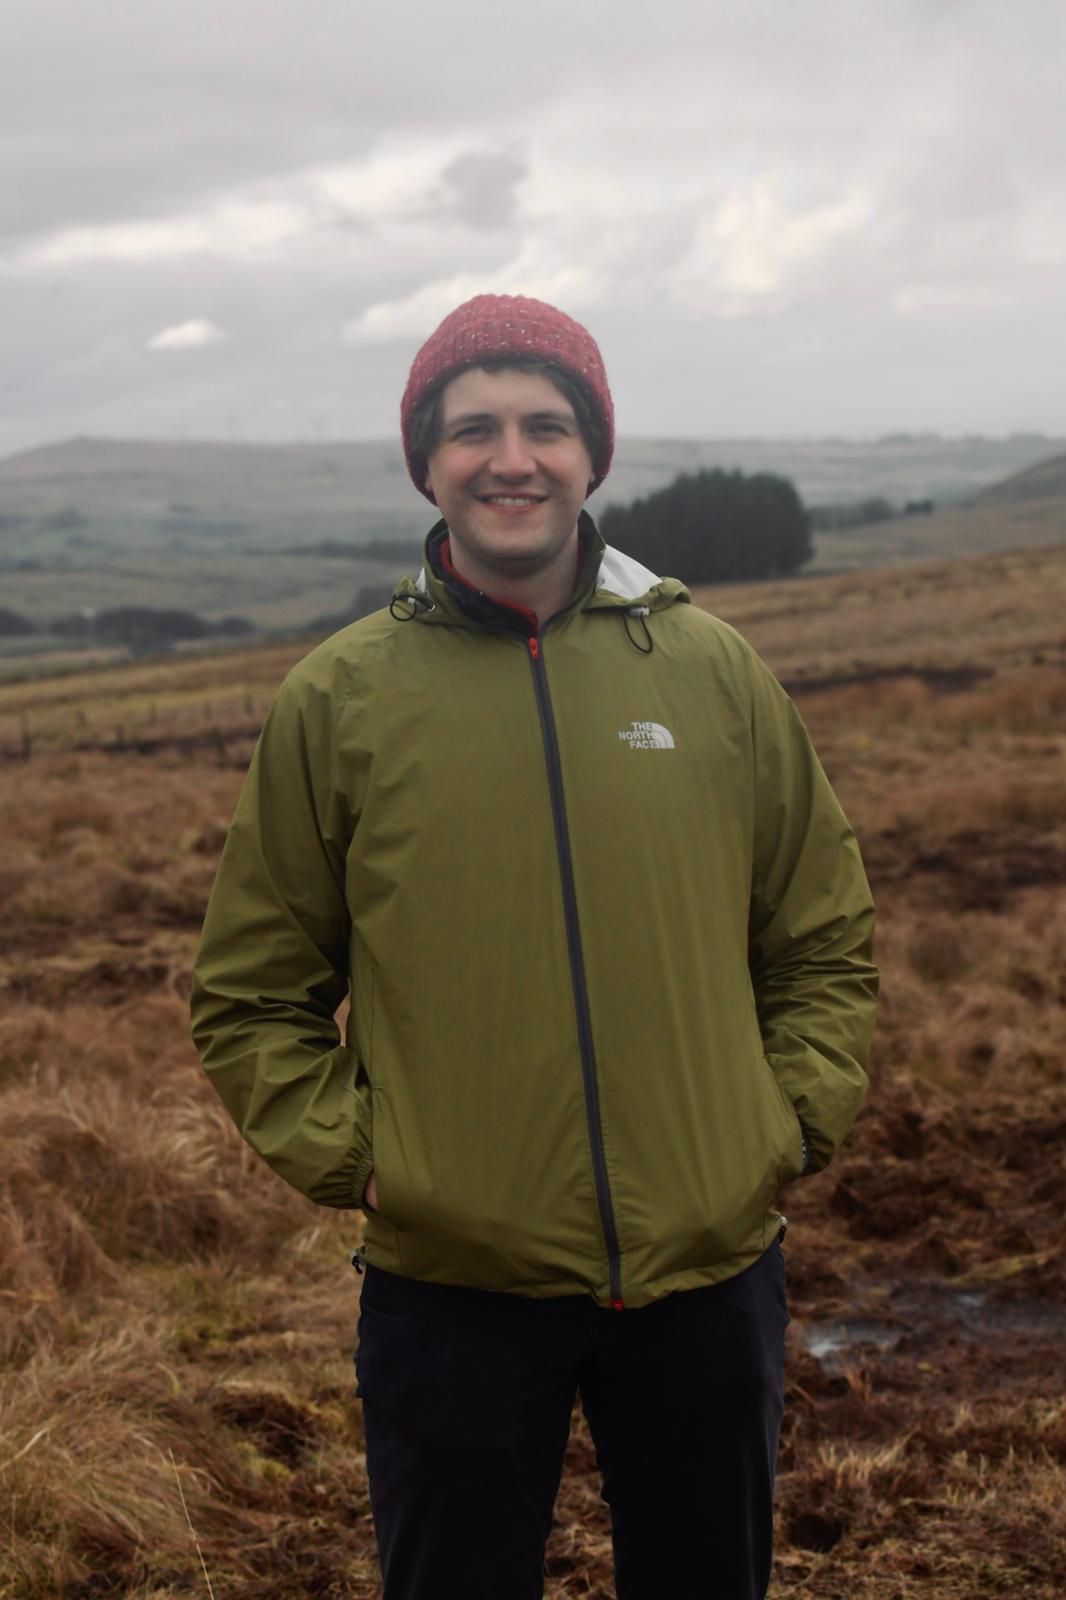 Ruairi on a visit to a peatland restoration site in County Antrim, Northern Ireland, where he communicated the value of nature based solutions. Credit: Dakota Reid.